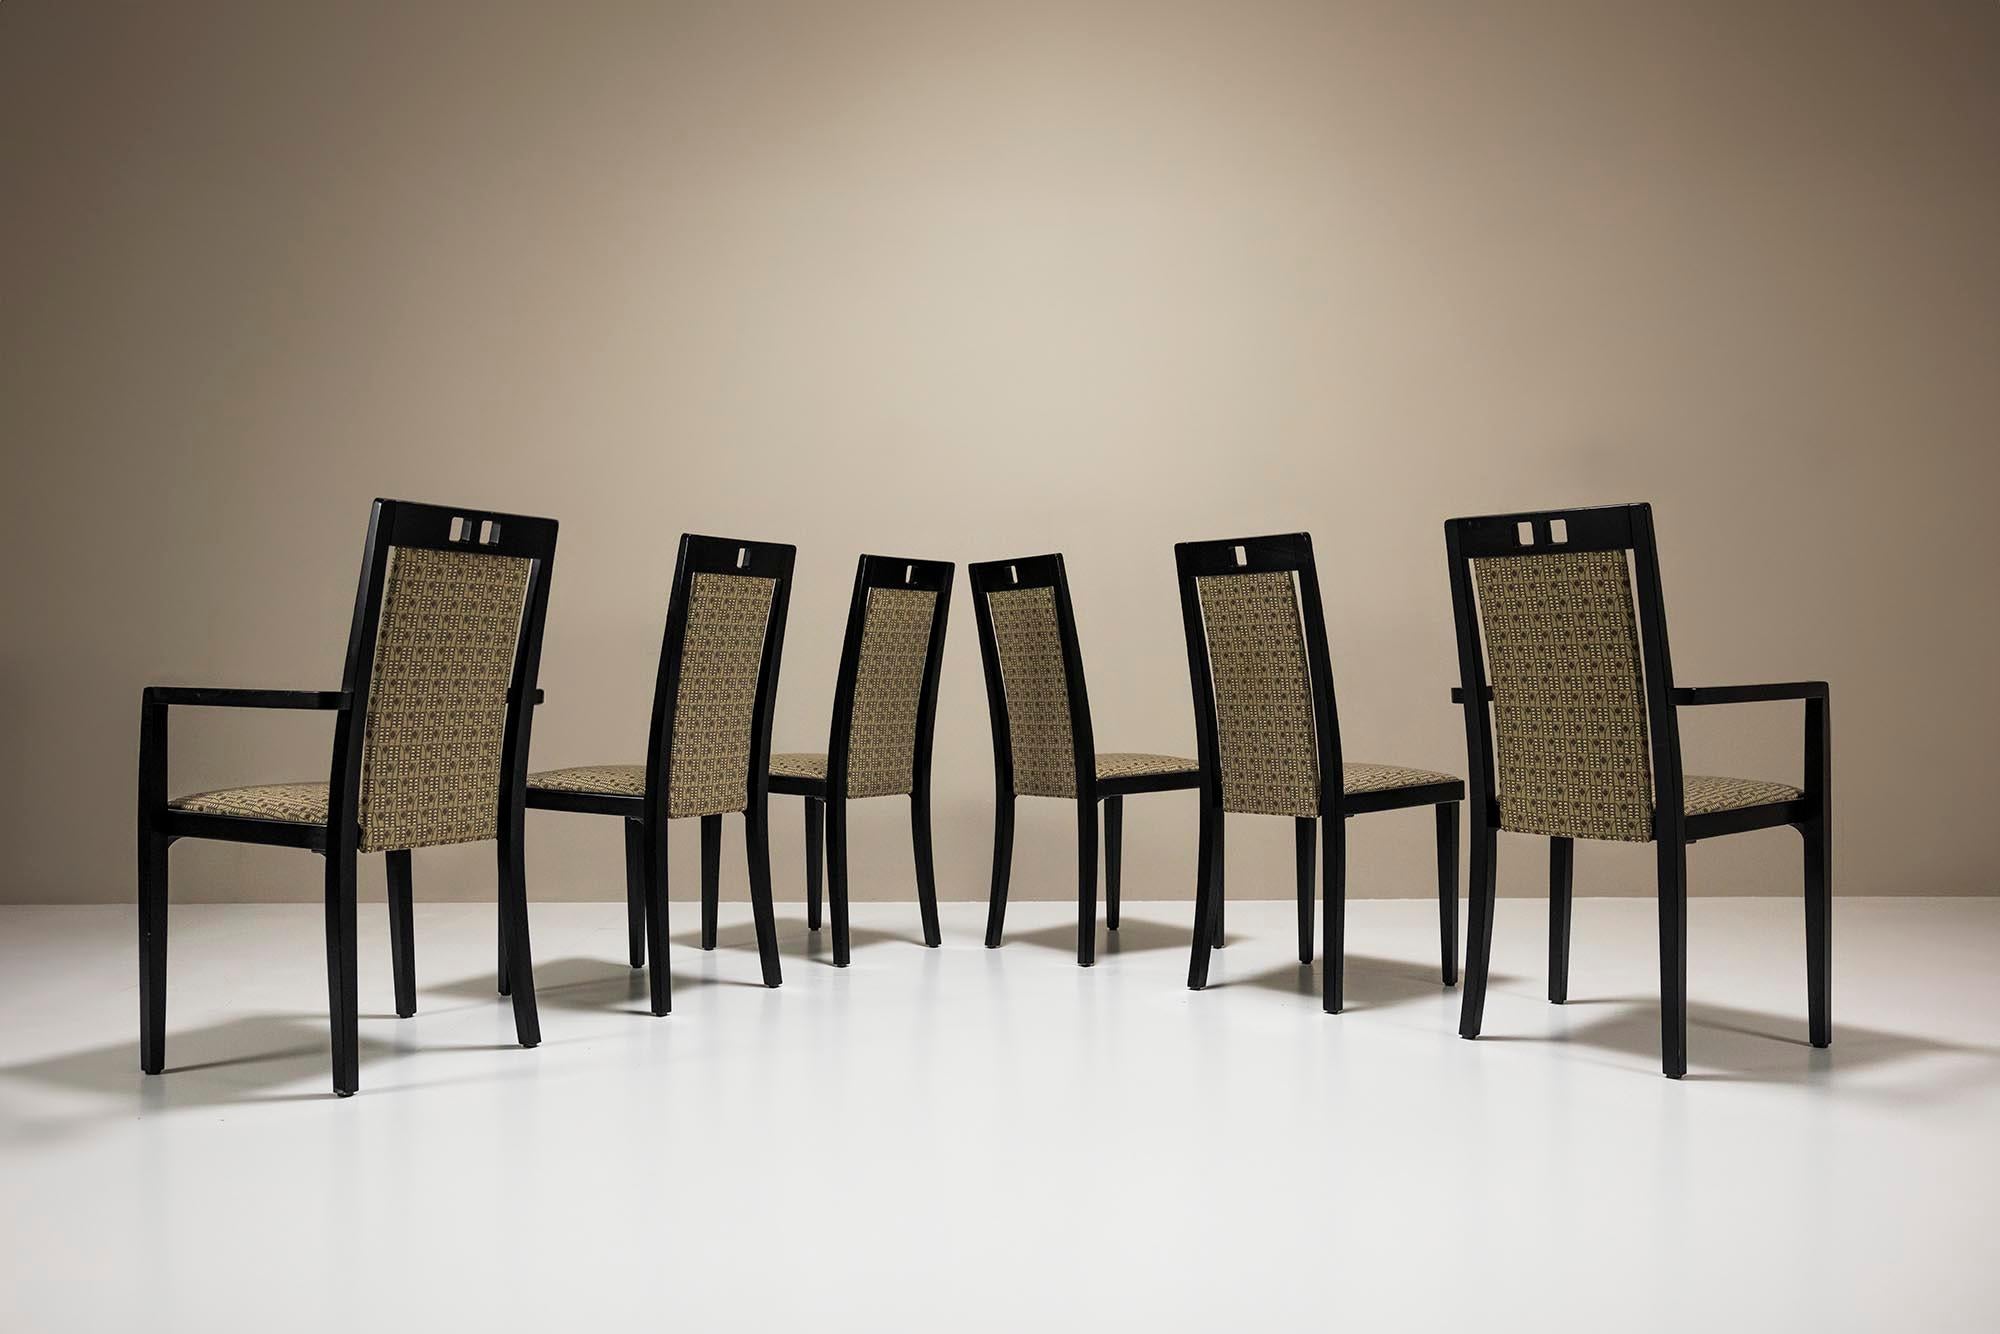 Thonet's history goes back approximately two hundred years and is best known for its wood bending technique. This technique created the characteristic bentwood chairs that were widespread in Vienna's cafés and restaurants around 1890. In the 1930s